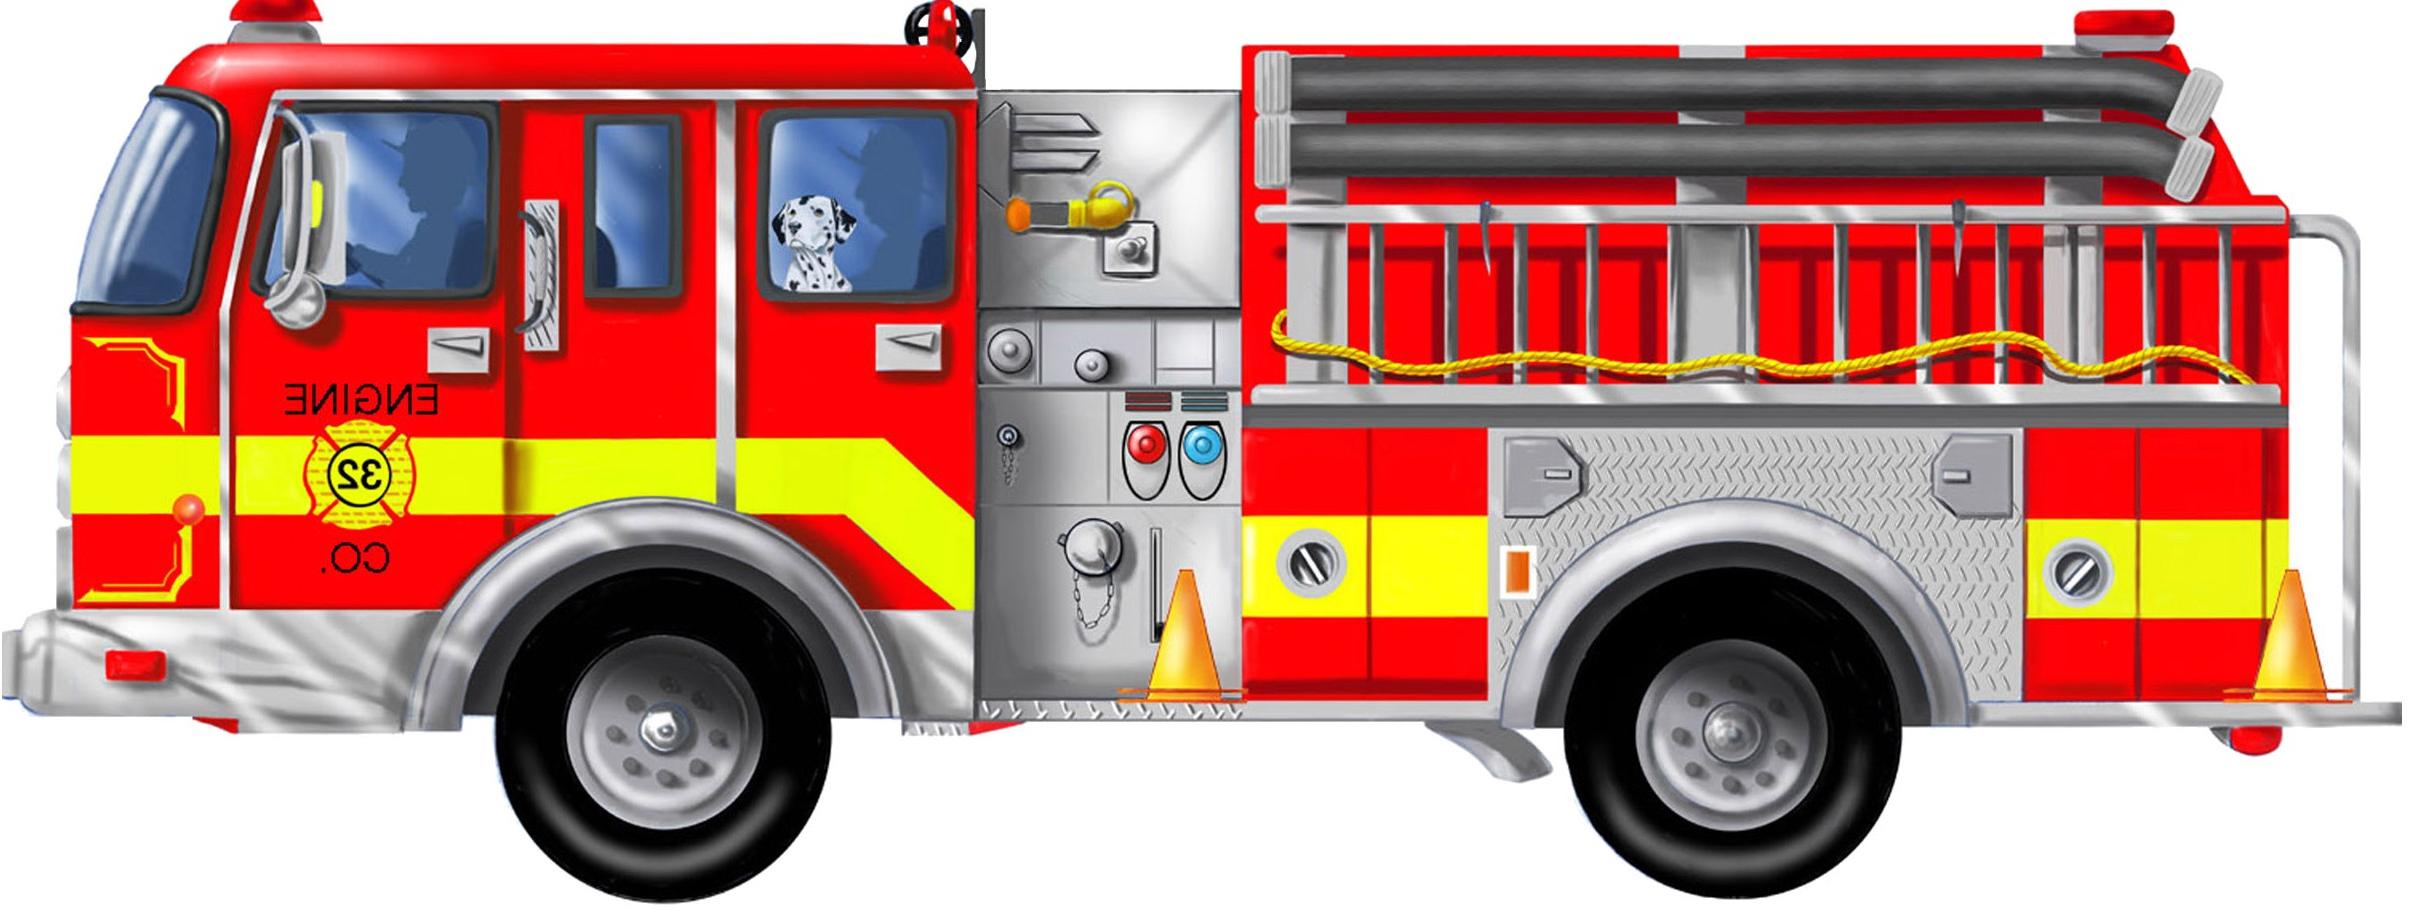 Fire truck free to use clipar